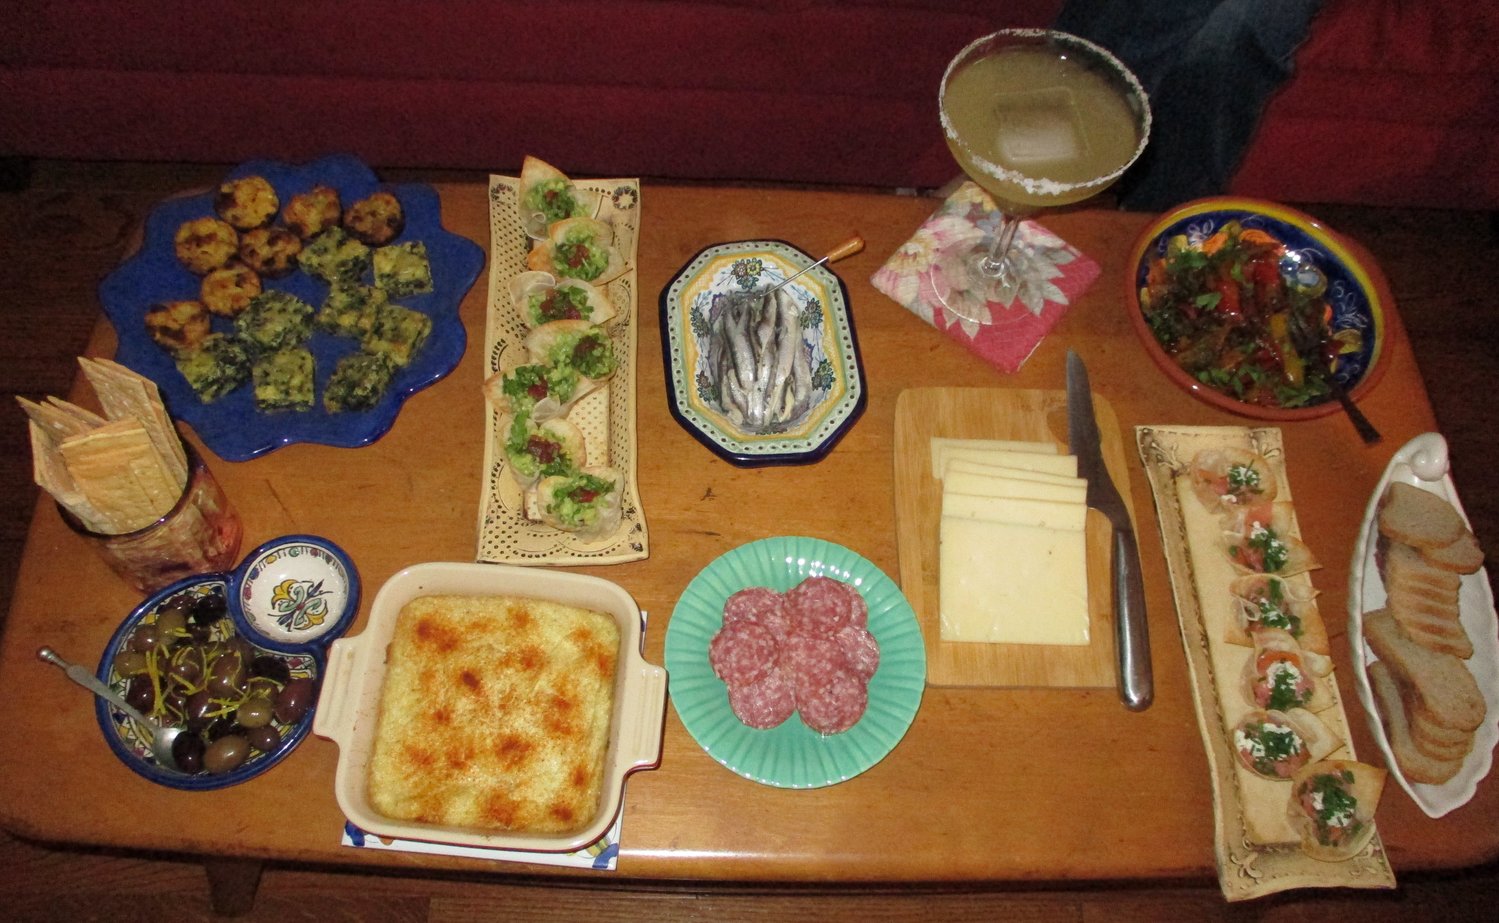 Dinner party: Spinach and cheese squares, mashed potato puffs, white anchovies, fried peppers, truffled cheese, baked artichoke dip, wonton cups filled with either smoked salmon or guacamole.